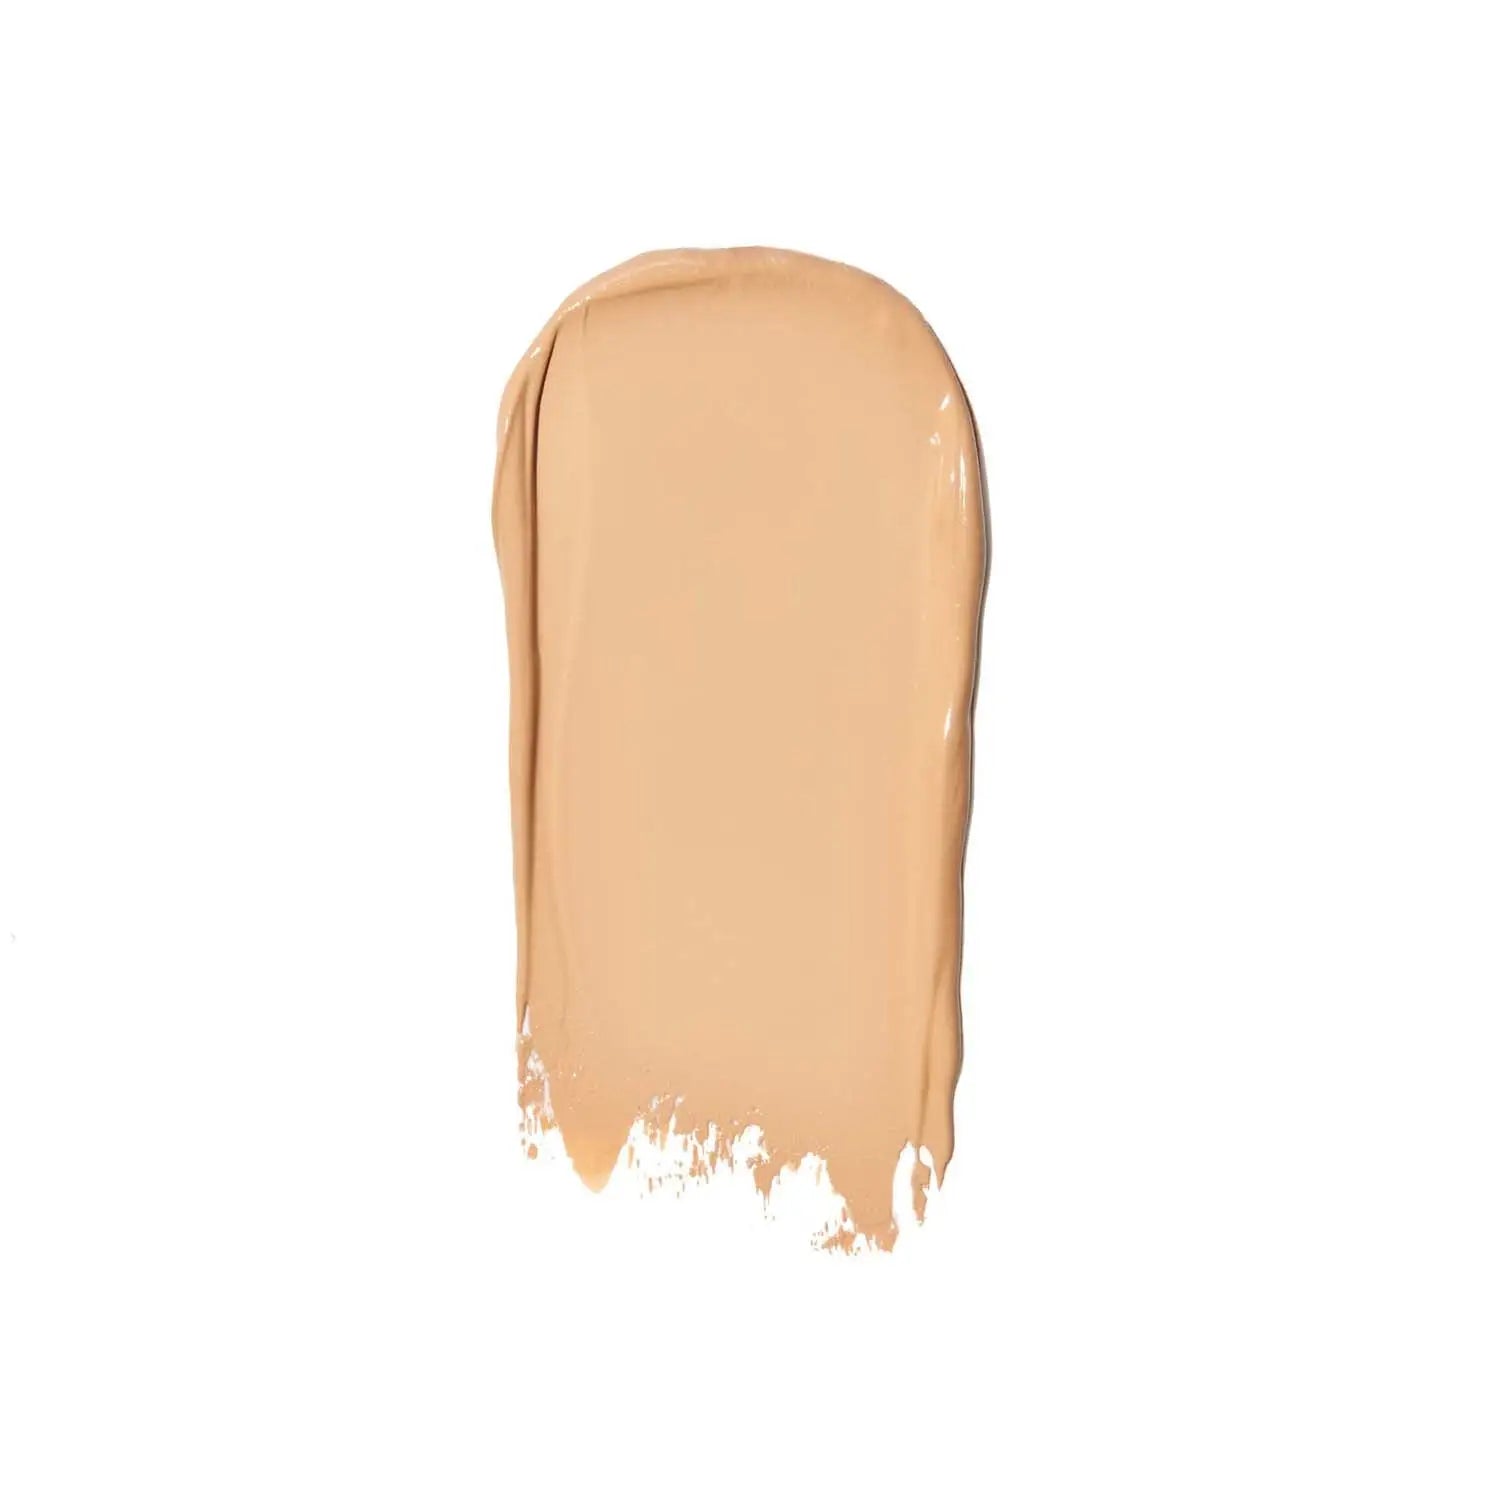 RMS Beauty Un’ Cover-up Cream Foundation 30ml - 22.5 Free 